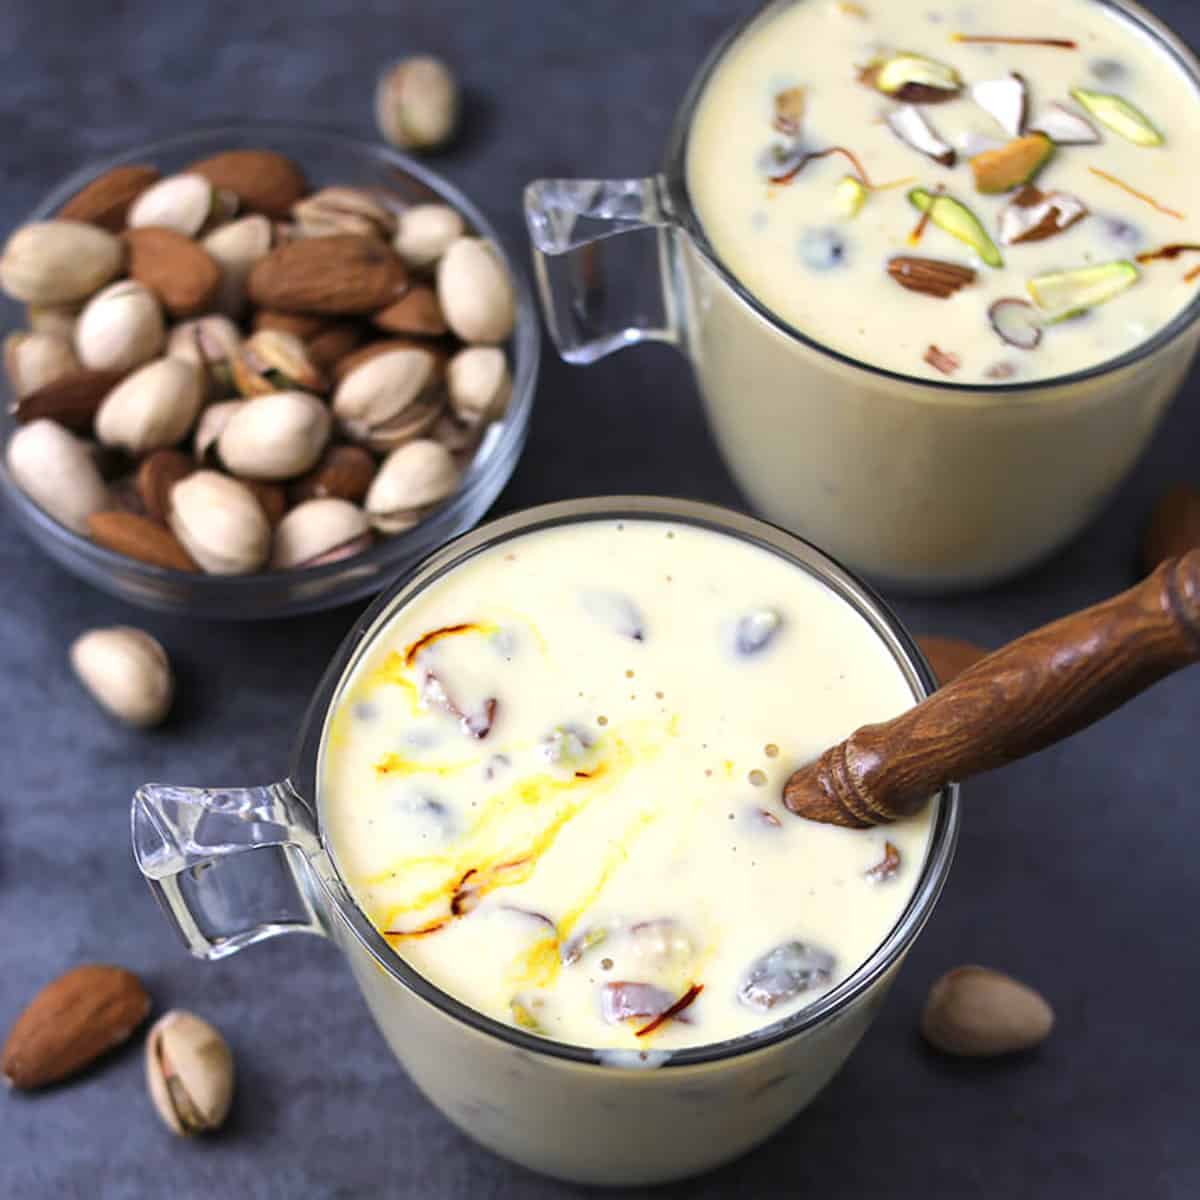 Basundi Indian sweet or dessert made with milk, condensed milk and flavored with cardamom, kesar. 